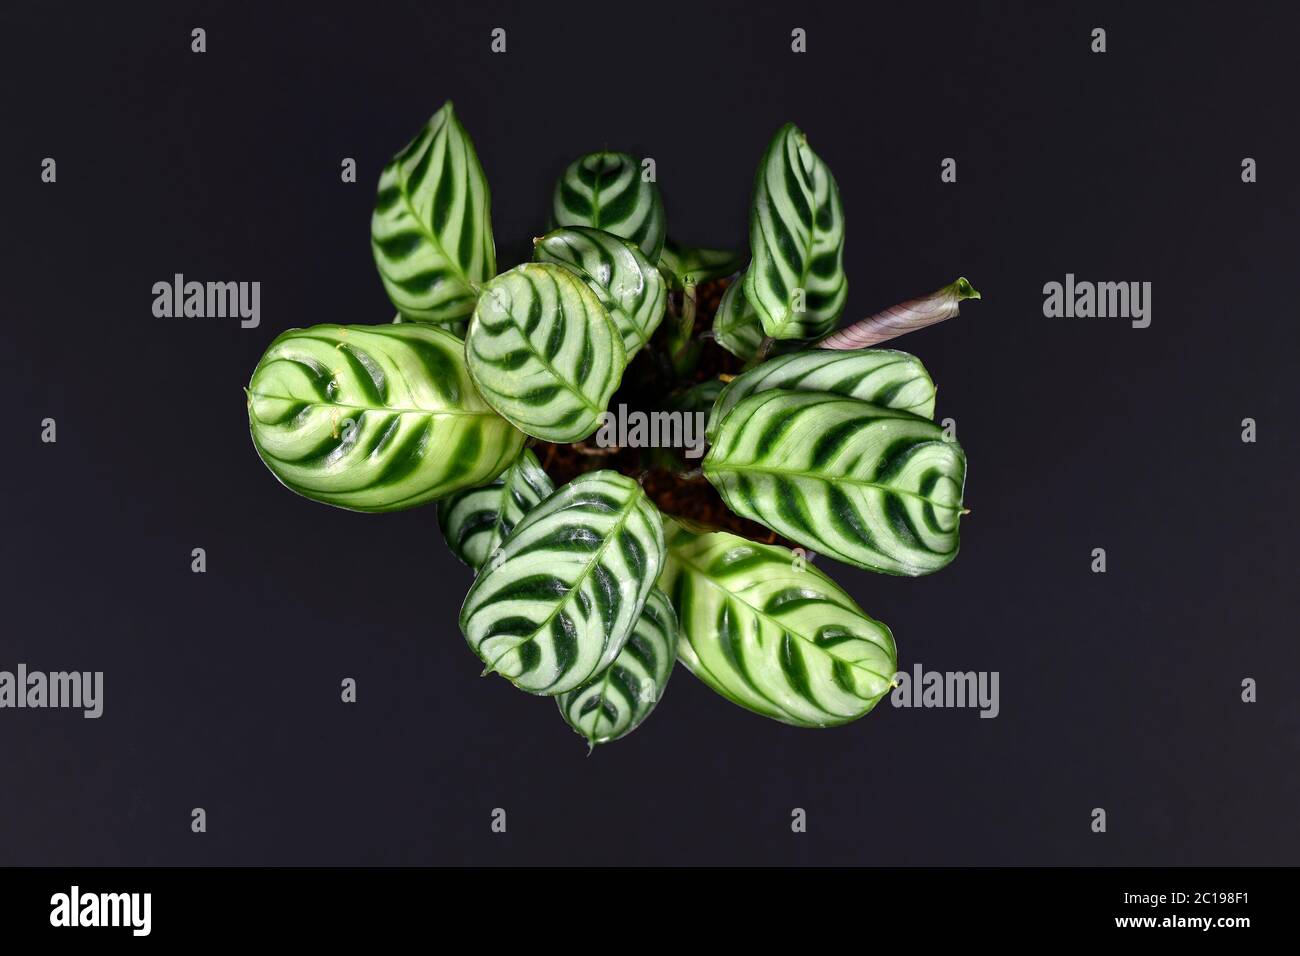 Tropical 'Ctenanthe Burle Marxii' house plant with exotic stripe pattern on leaves on dark black background Stock Photo